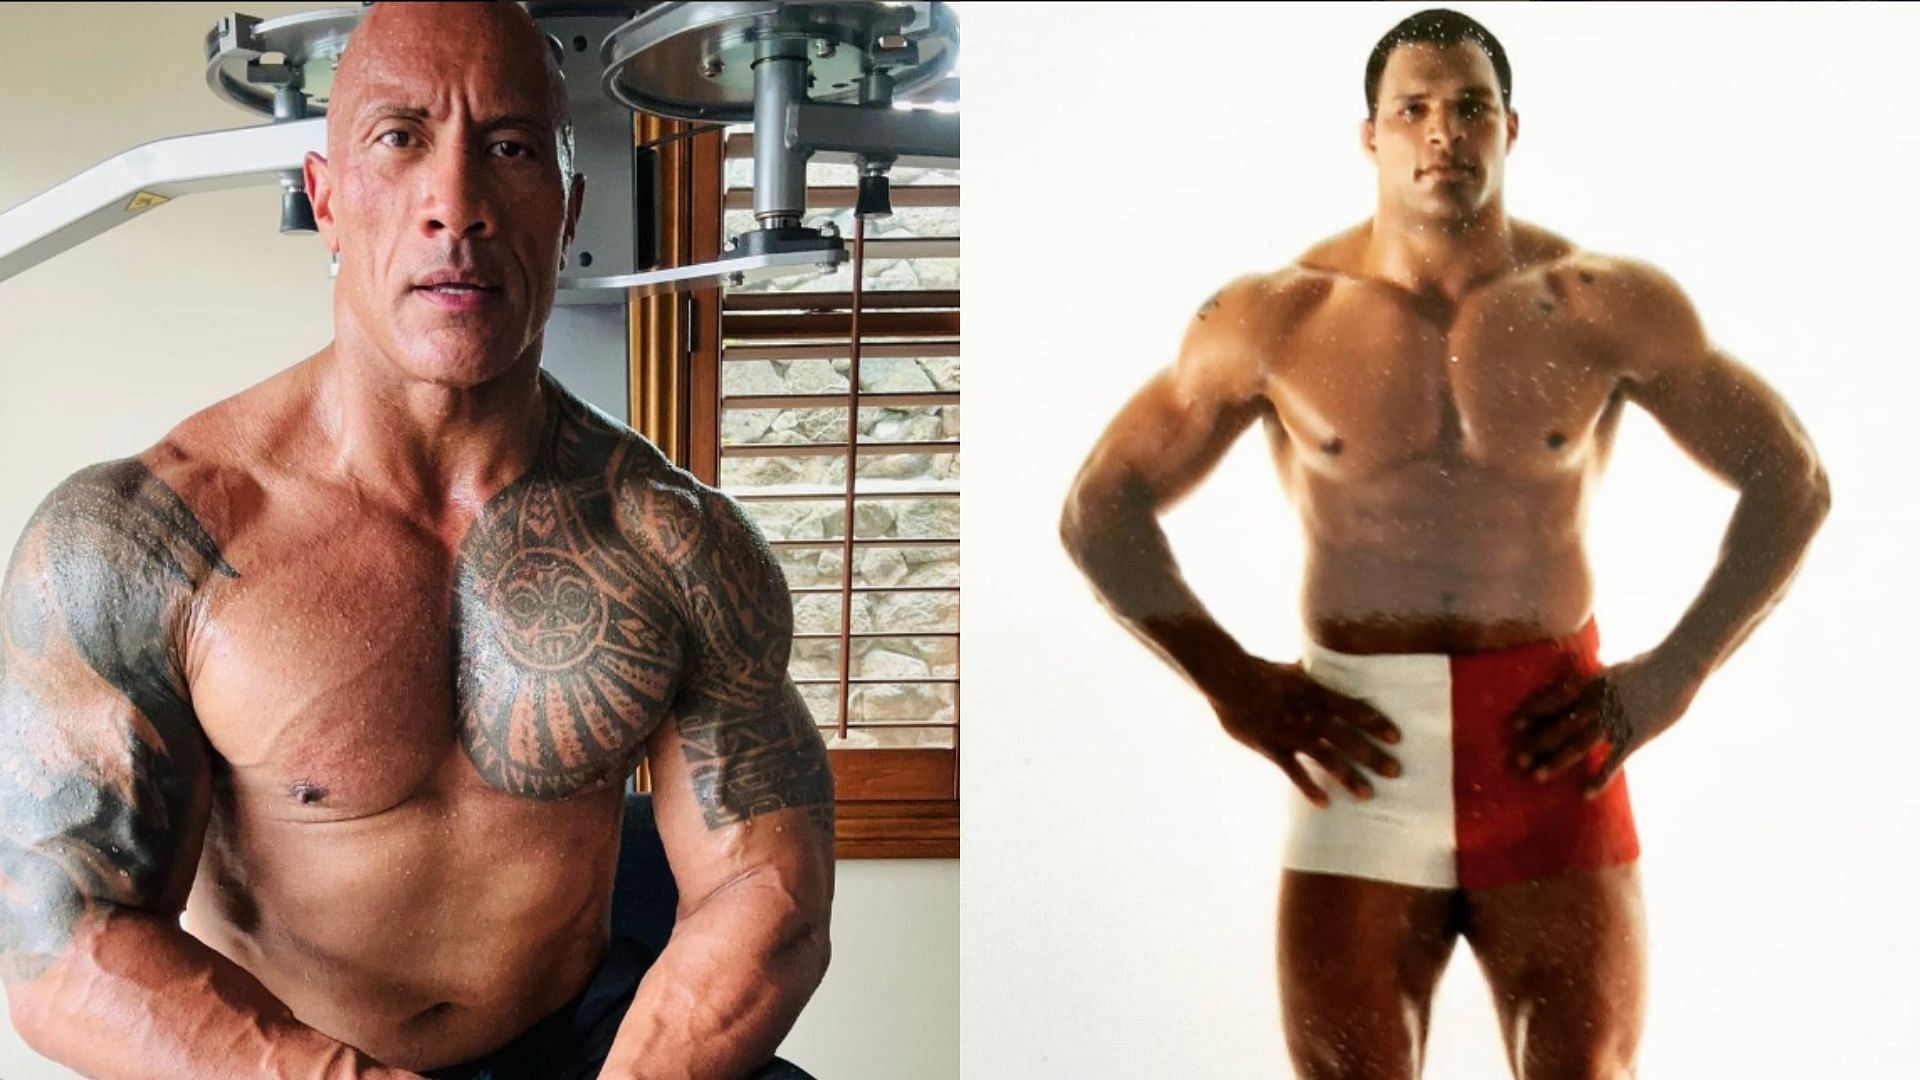 Dwayne Johnson (left) is set to play former UFC fighter Mark Kerr (right) in an upcoming movie [Images courtesy of @therock &amp; @markkerrtsm]